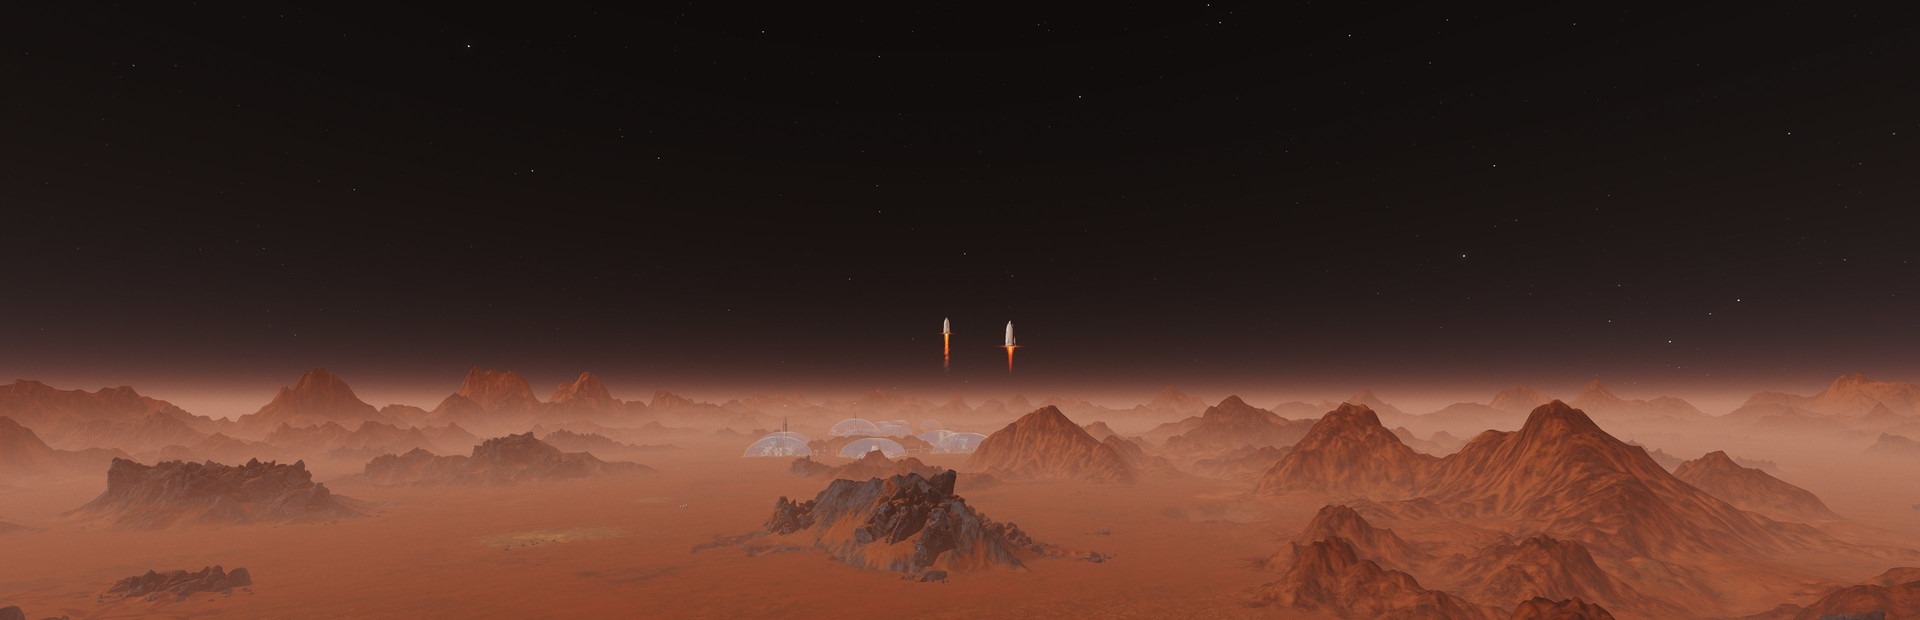 Banner Surviving Mars: Marsvision Song Contest